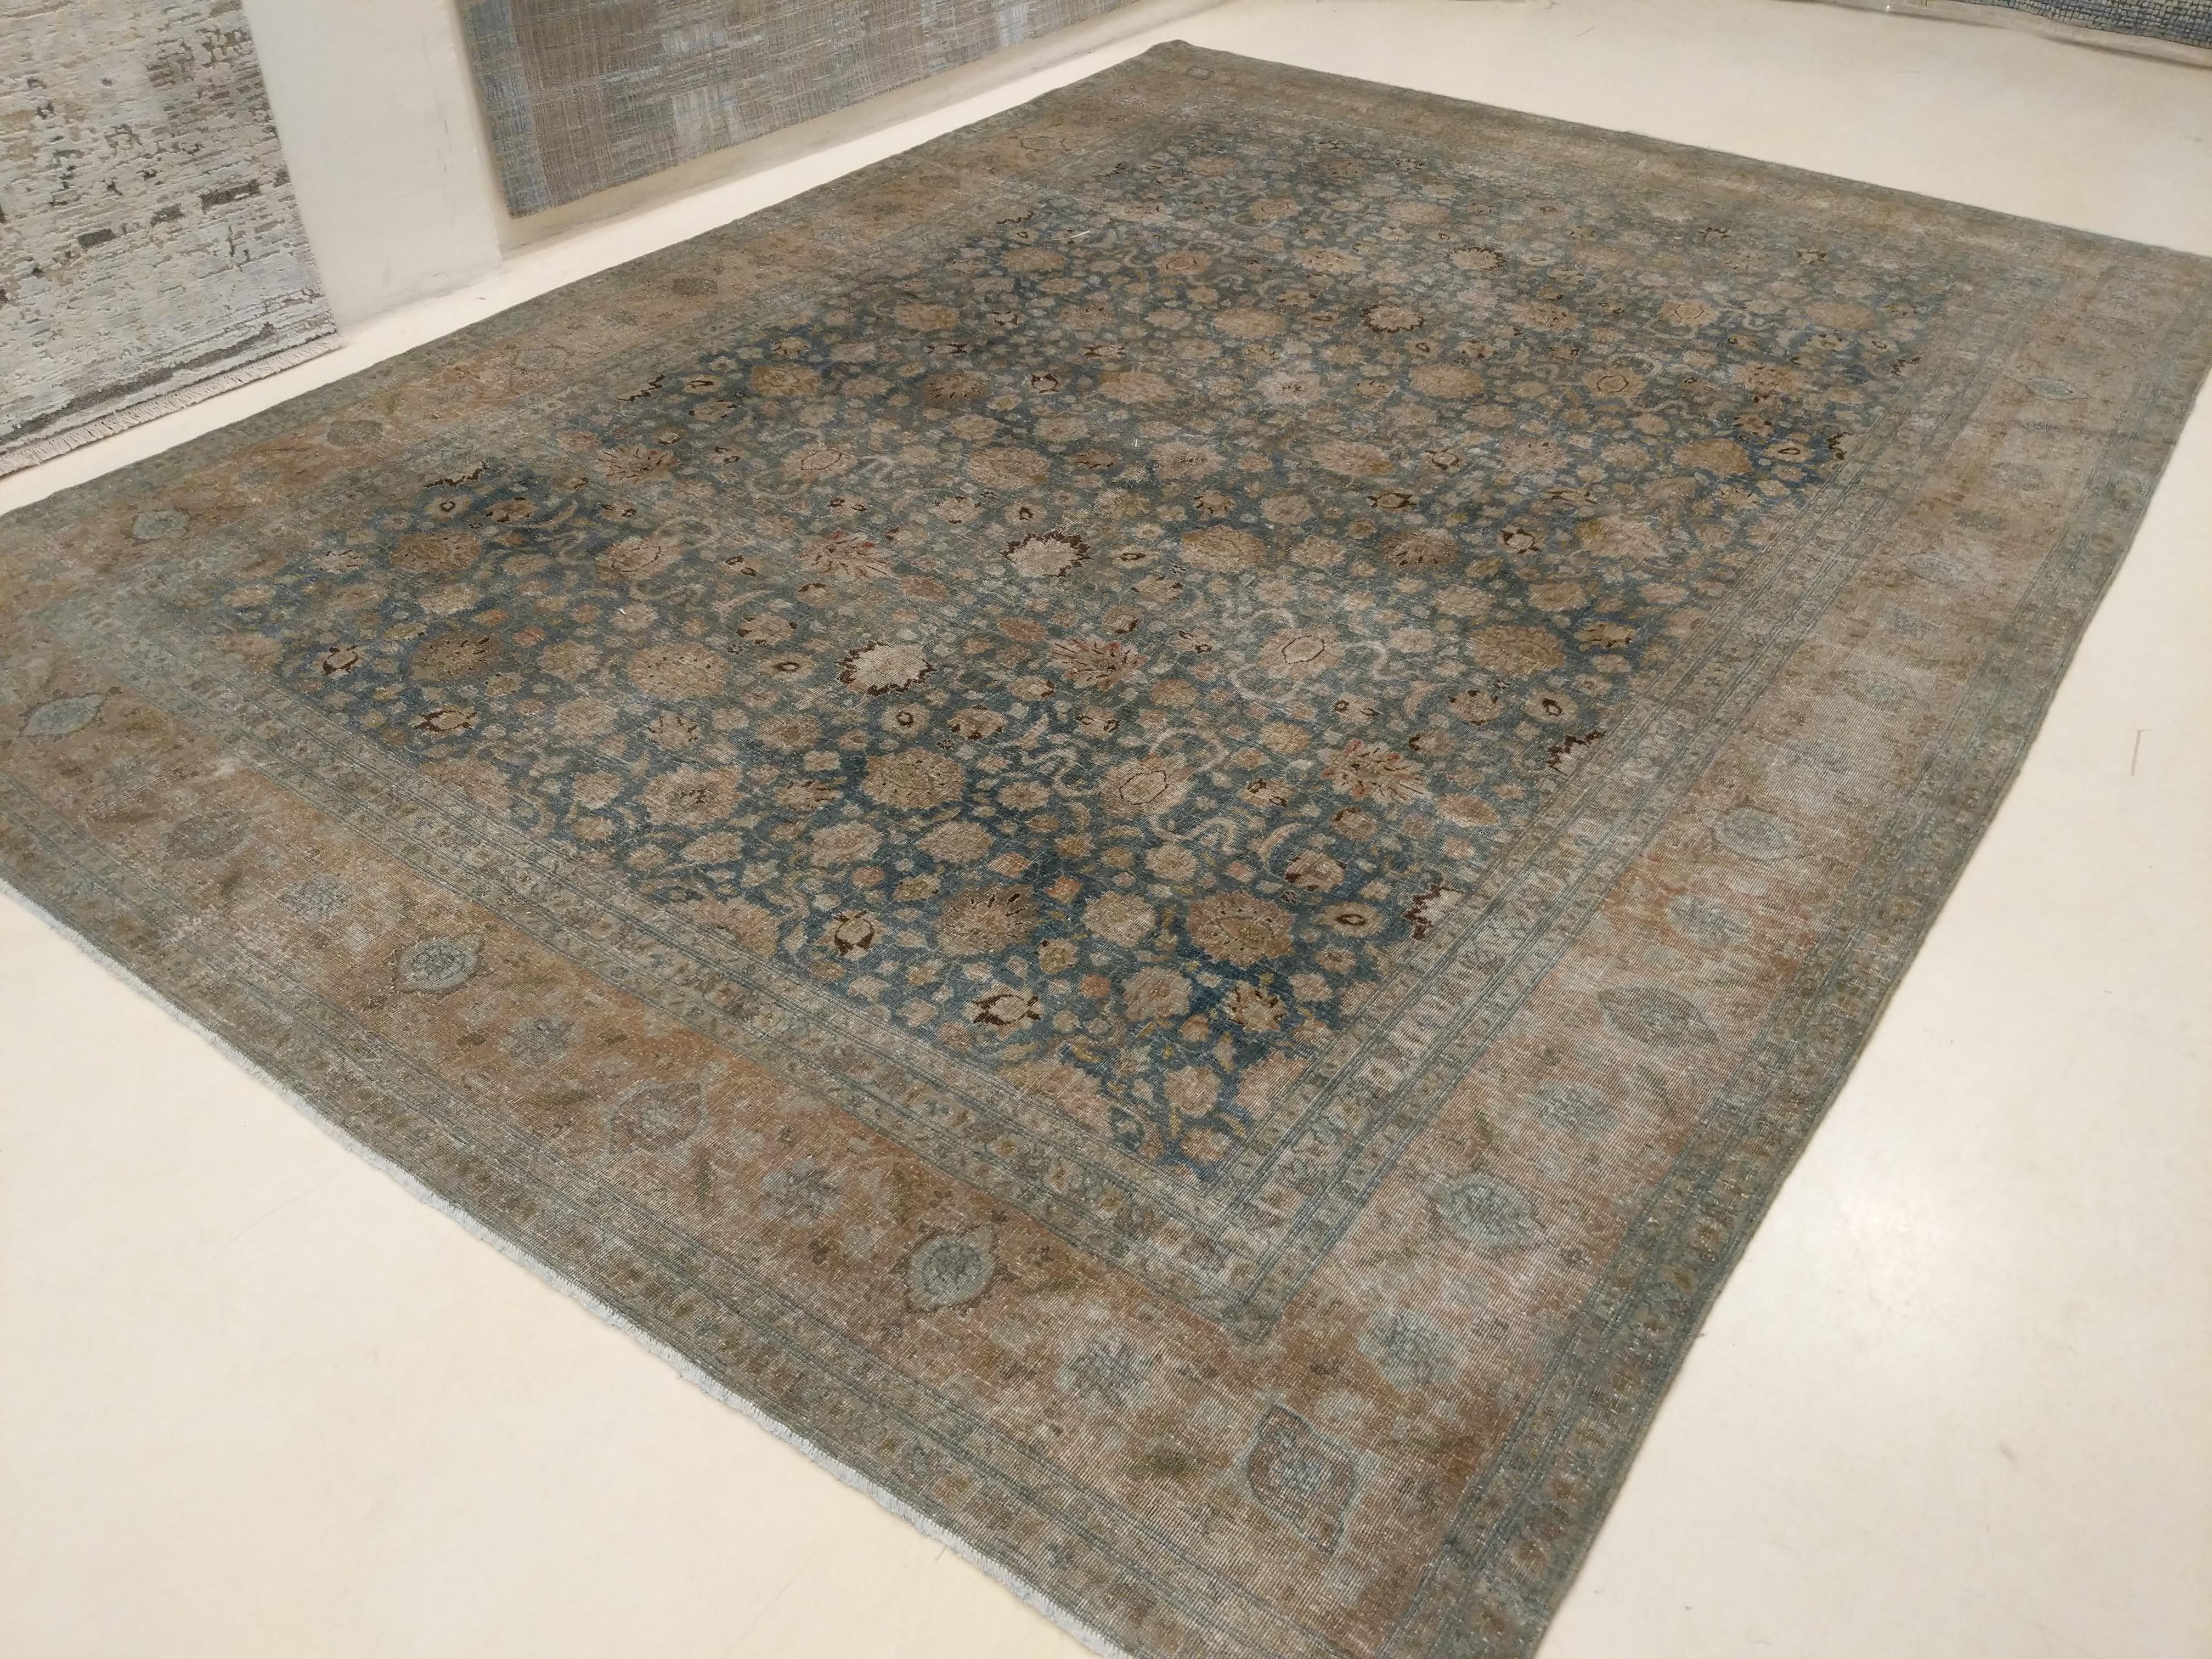 A finely woven old Anatolian carpet of great nobility, distinguished by an infinite repeat pattern of delicately colored cloudband palmettes and rosettes floating on an aqua-teal background. One of our most beautiful recent acquisitions in terms of